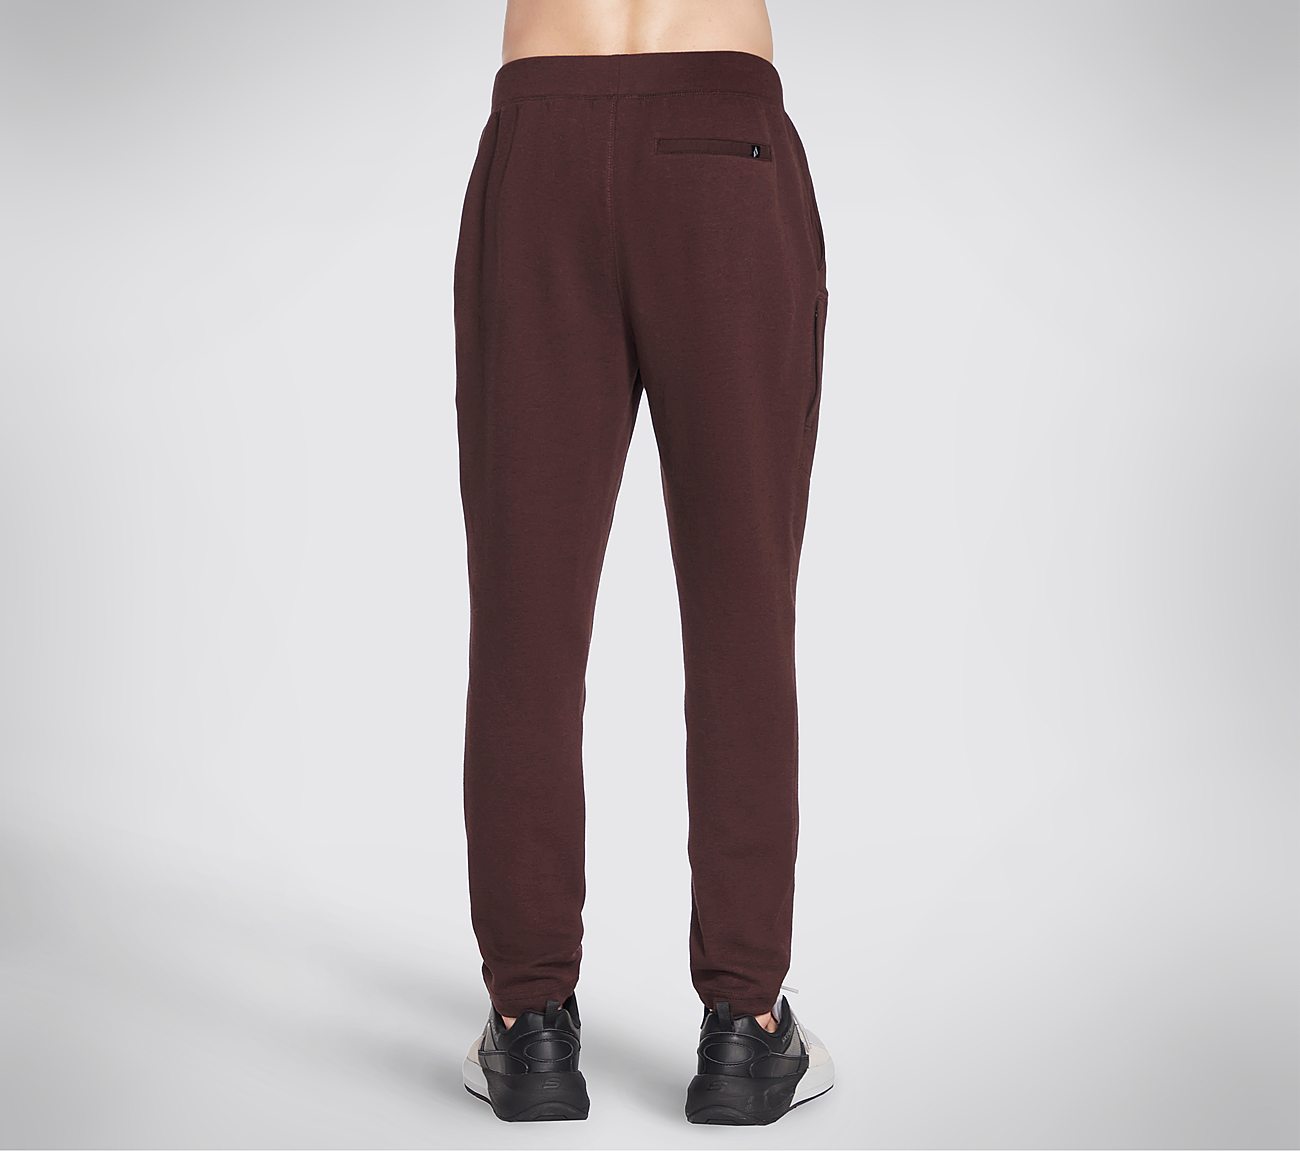 THE GOWALK PANT STROLL, BURGUNDY Apparel Top View